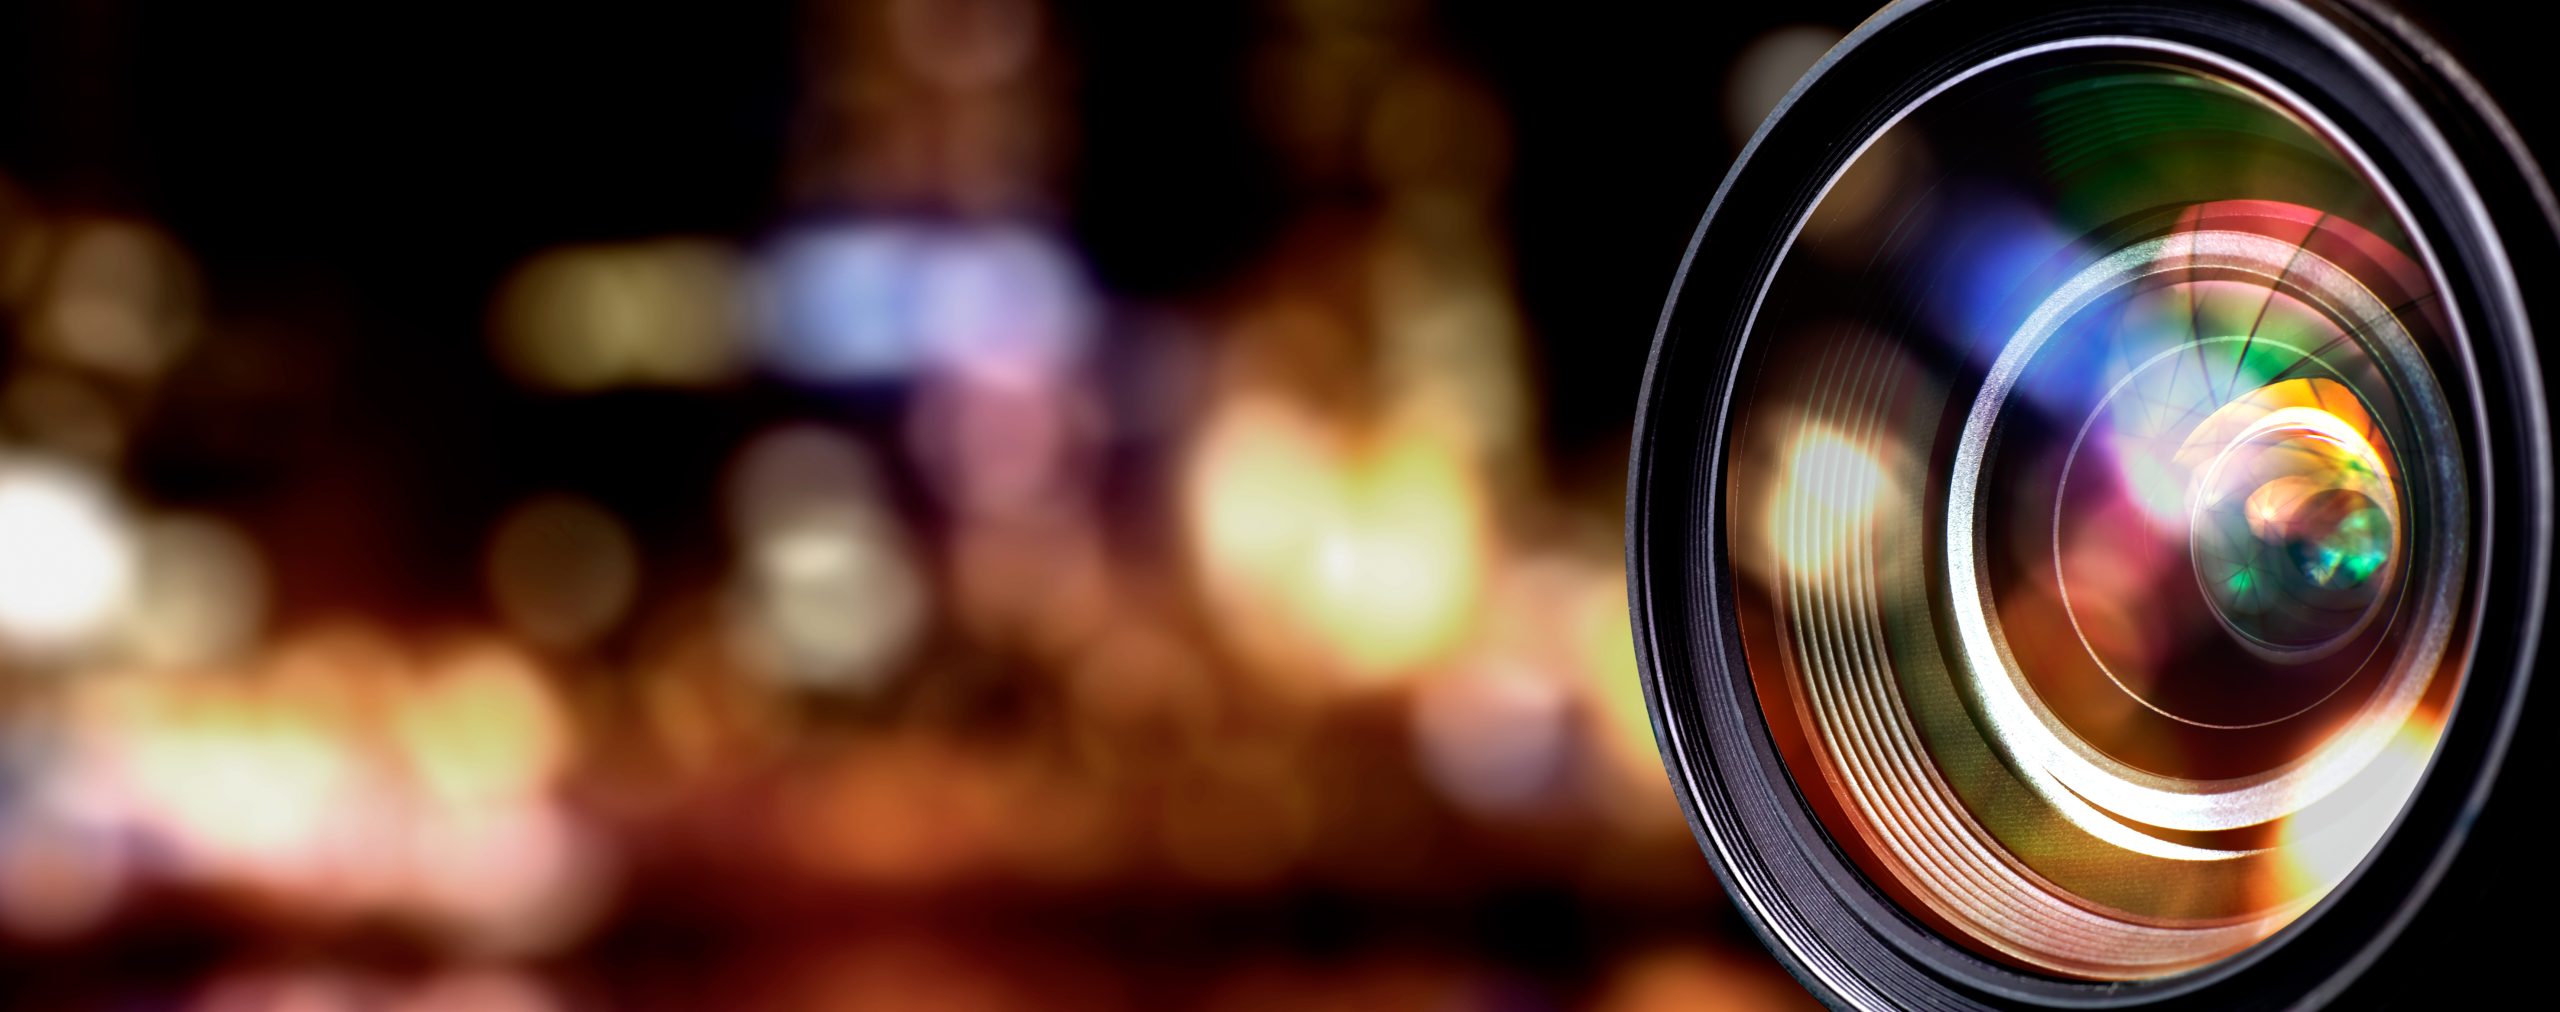 A camera lens in view with a blurred background.